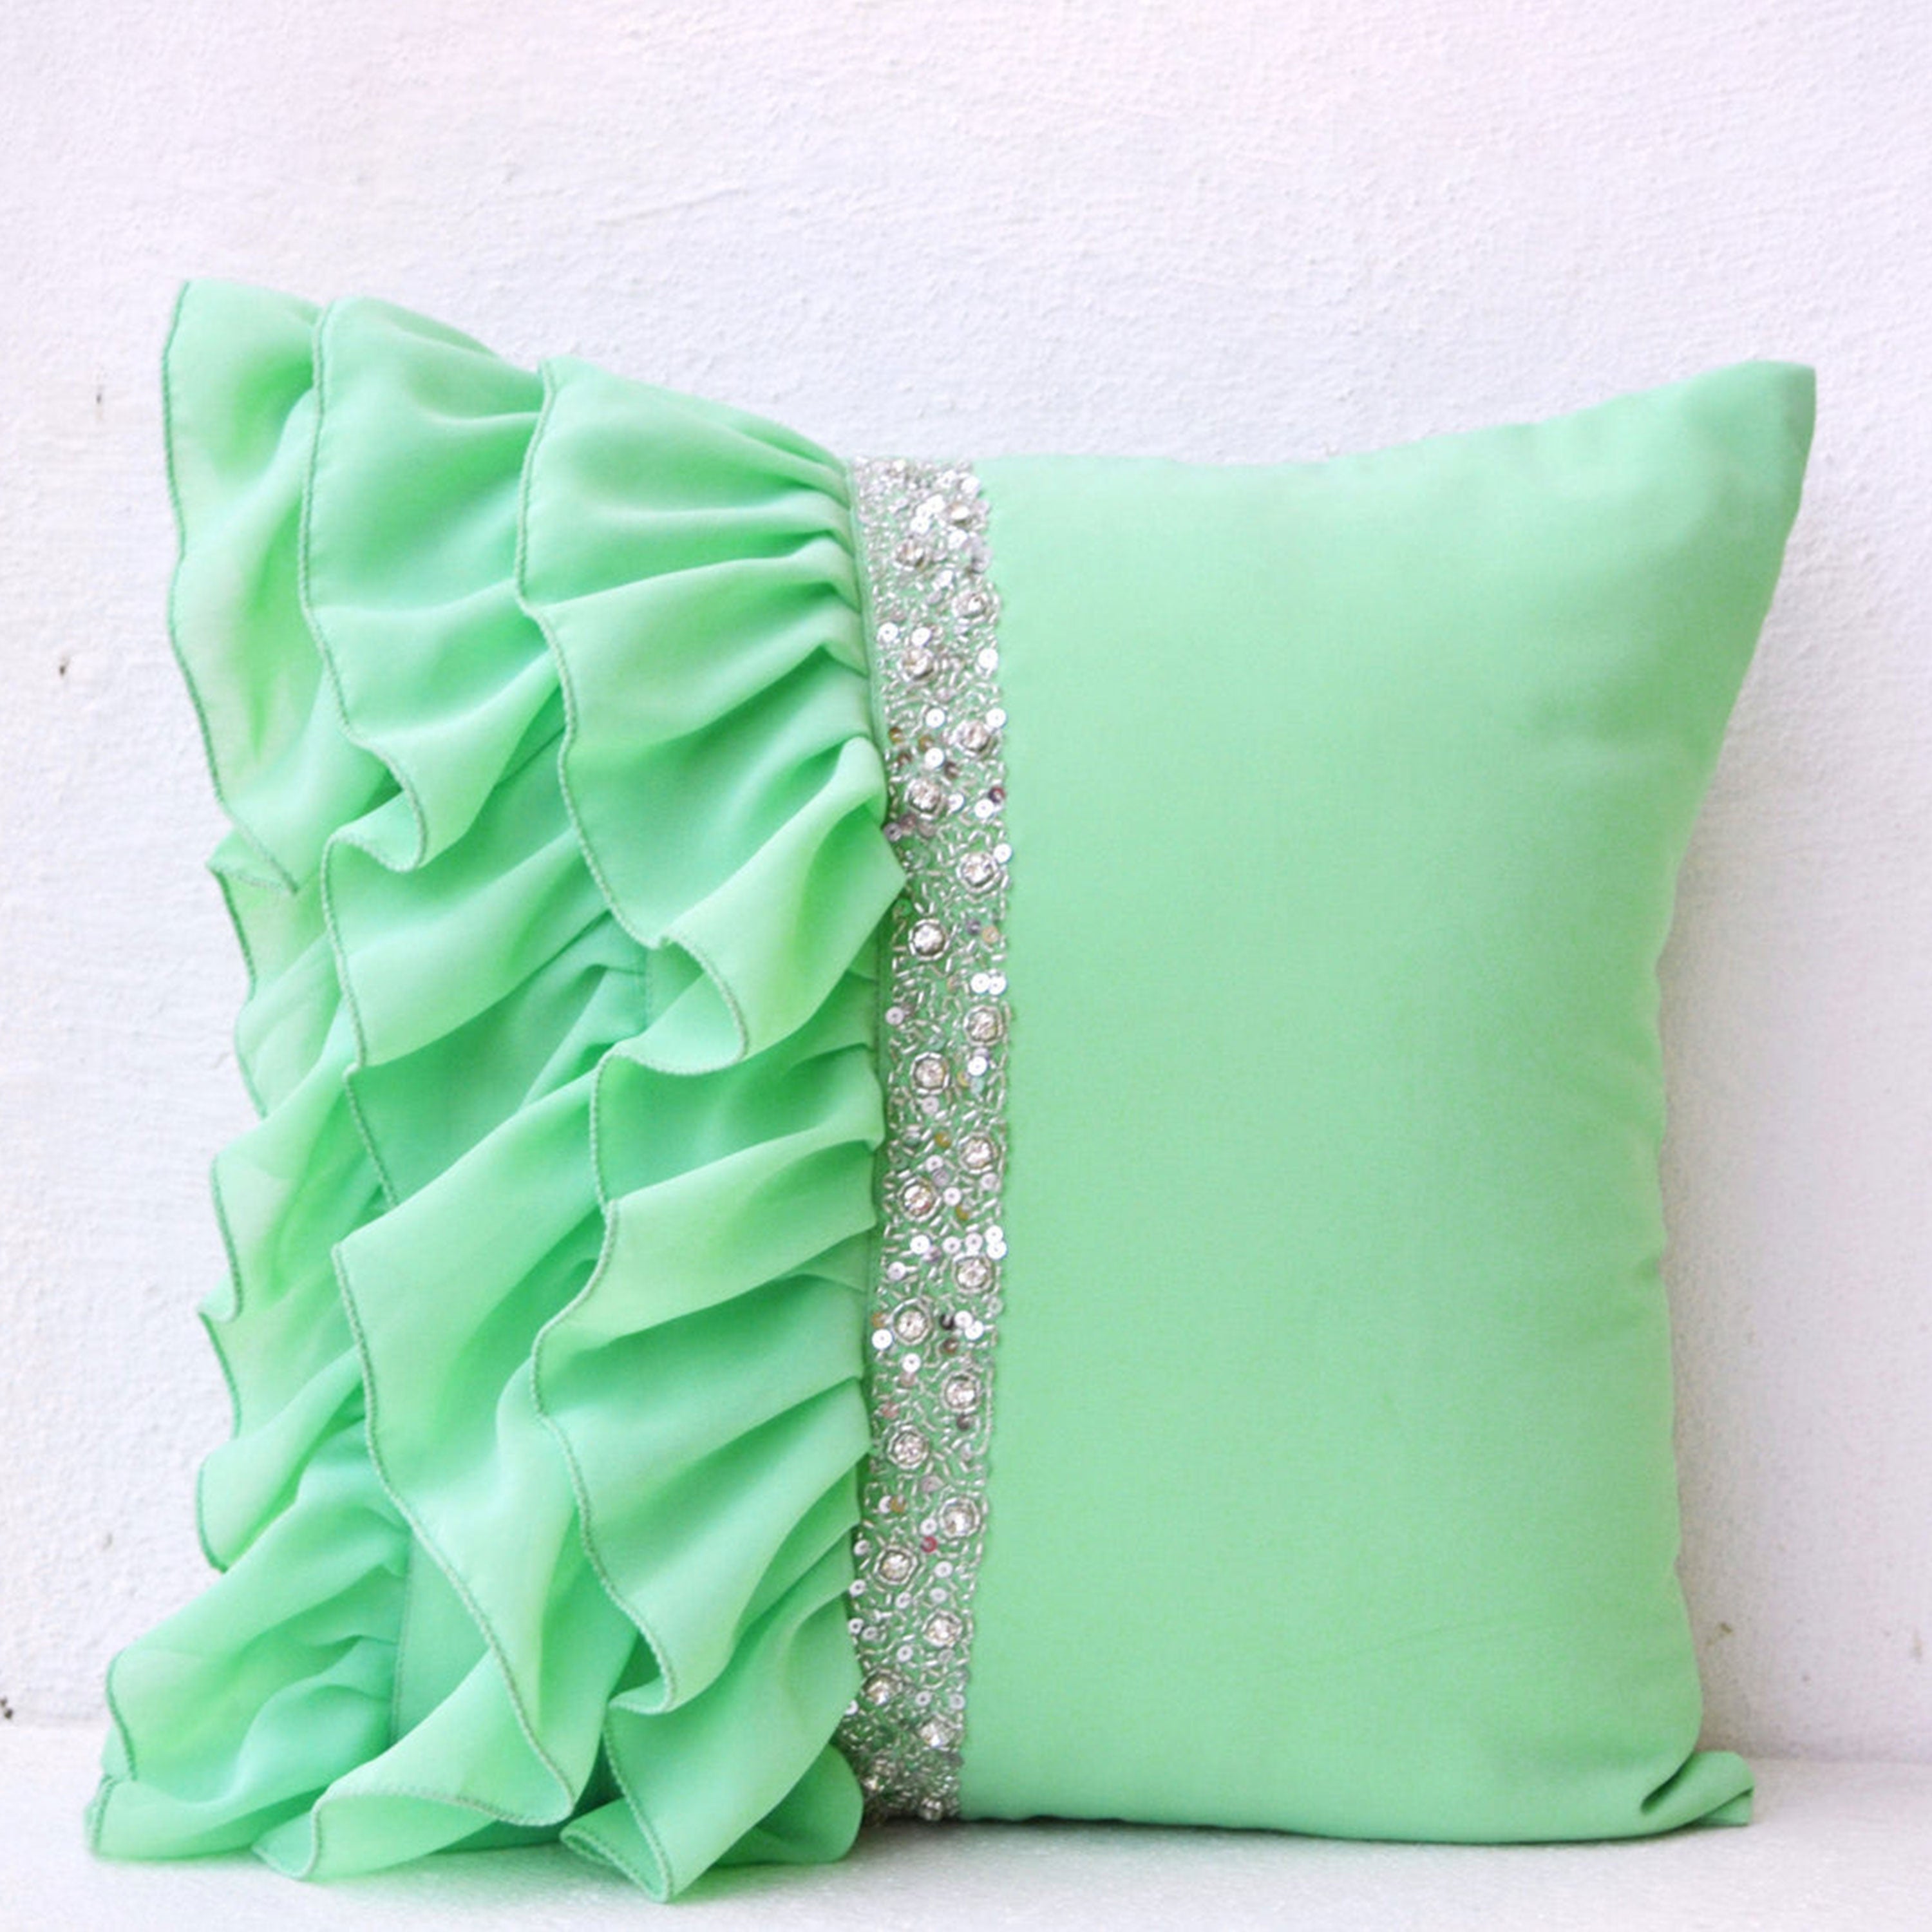 Mint green ruffled beaded throw pillows- 16X16- Decorative Throw Pillow Cases- Mint cushion cover - Gift -Rhinestone Bead Embroidered Pillow